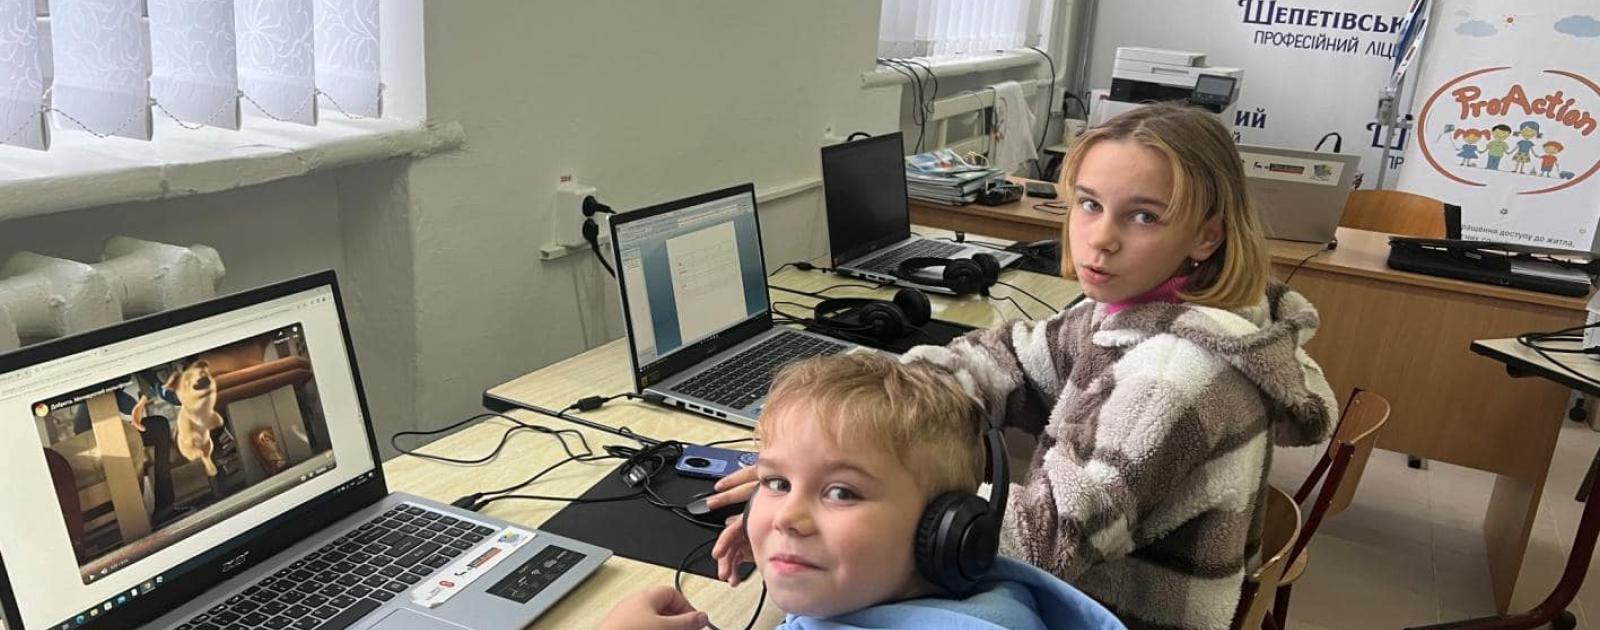 Children study at the computer